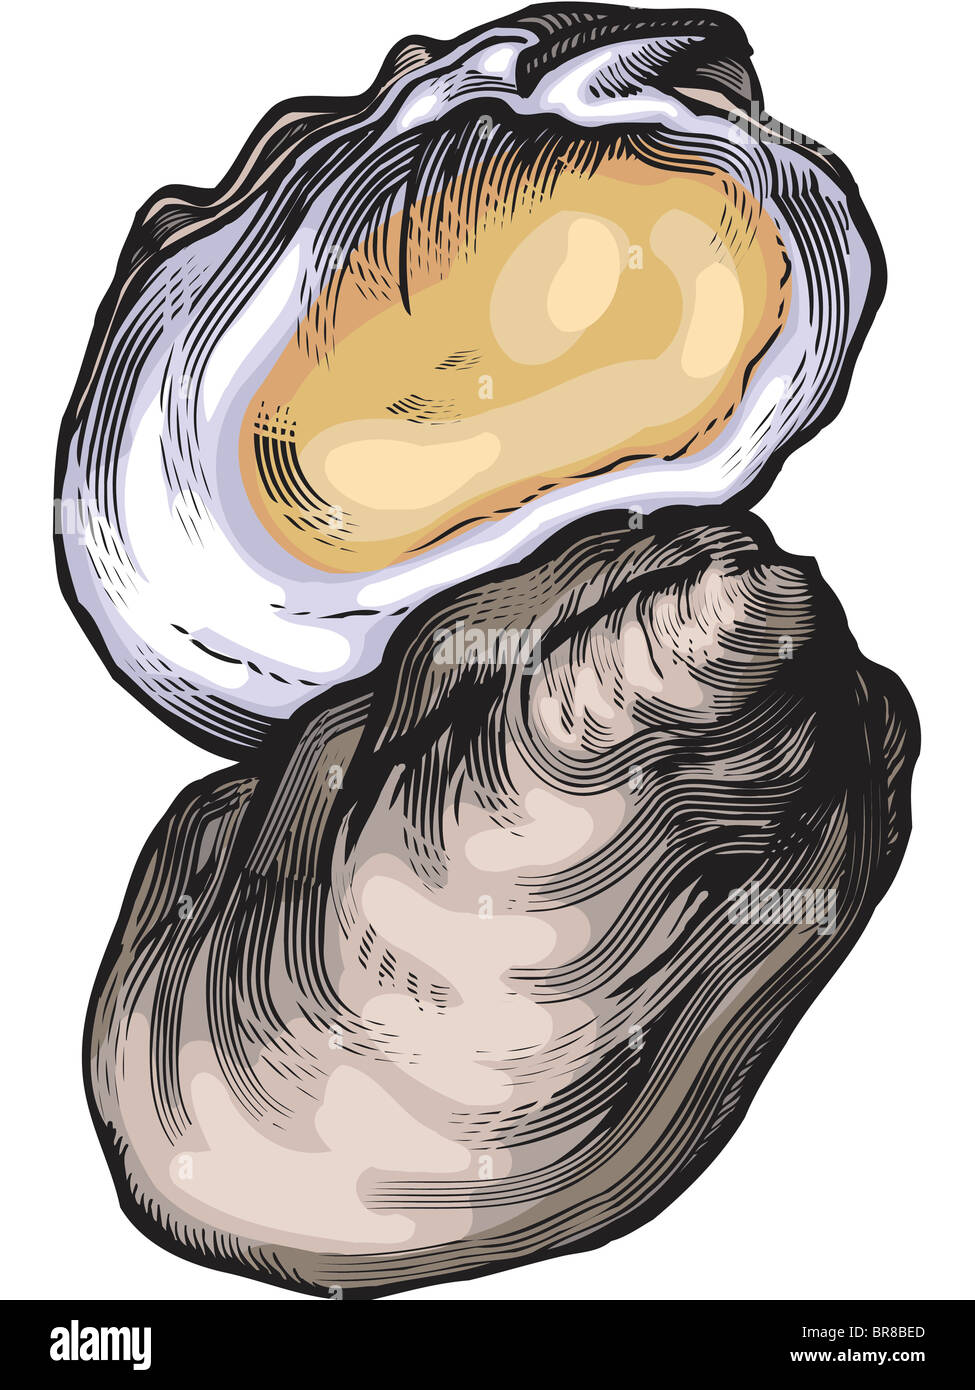 Oyster Drawing - All you will need is a pencil, pen, or marker and a